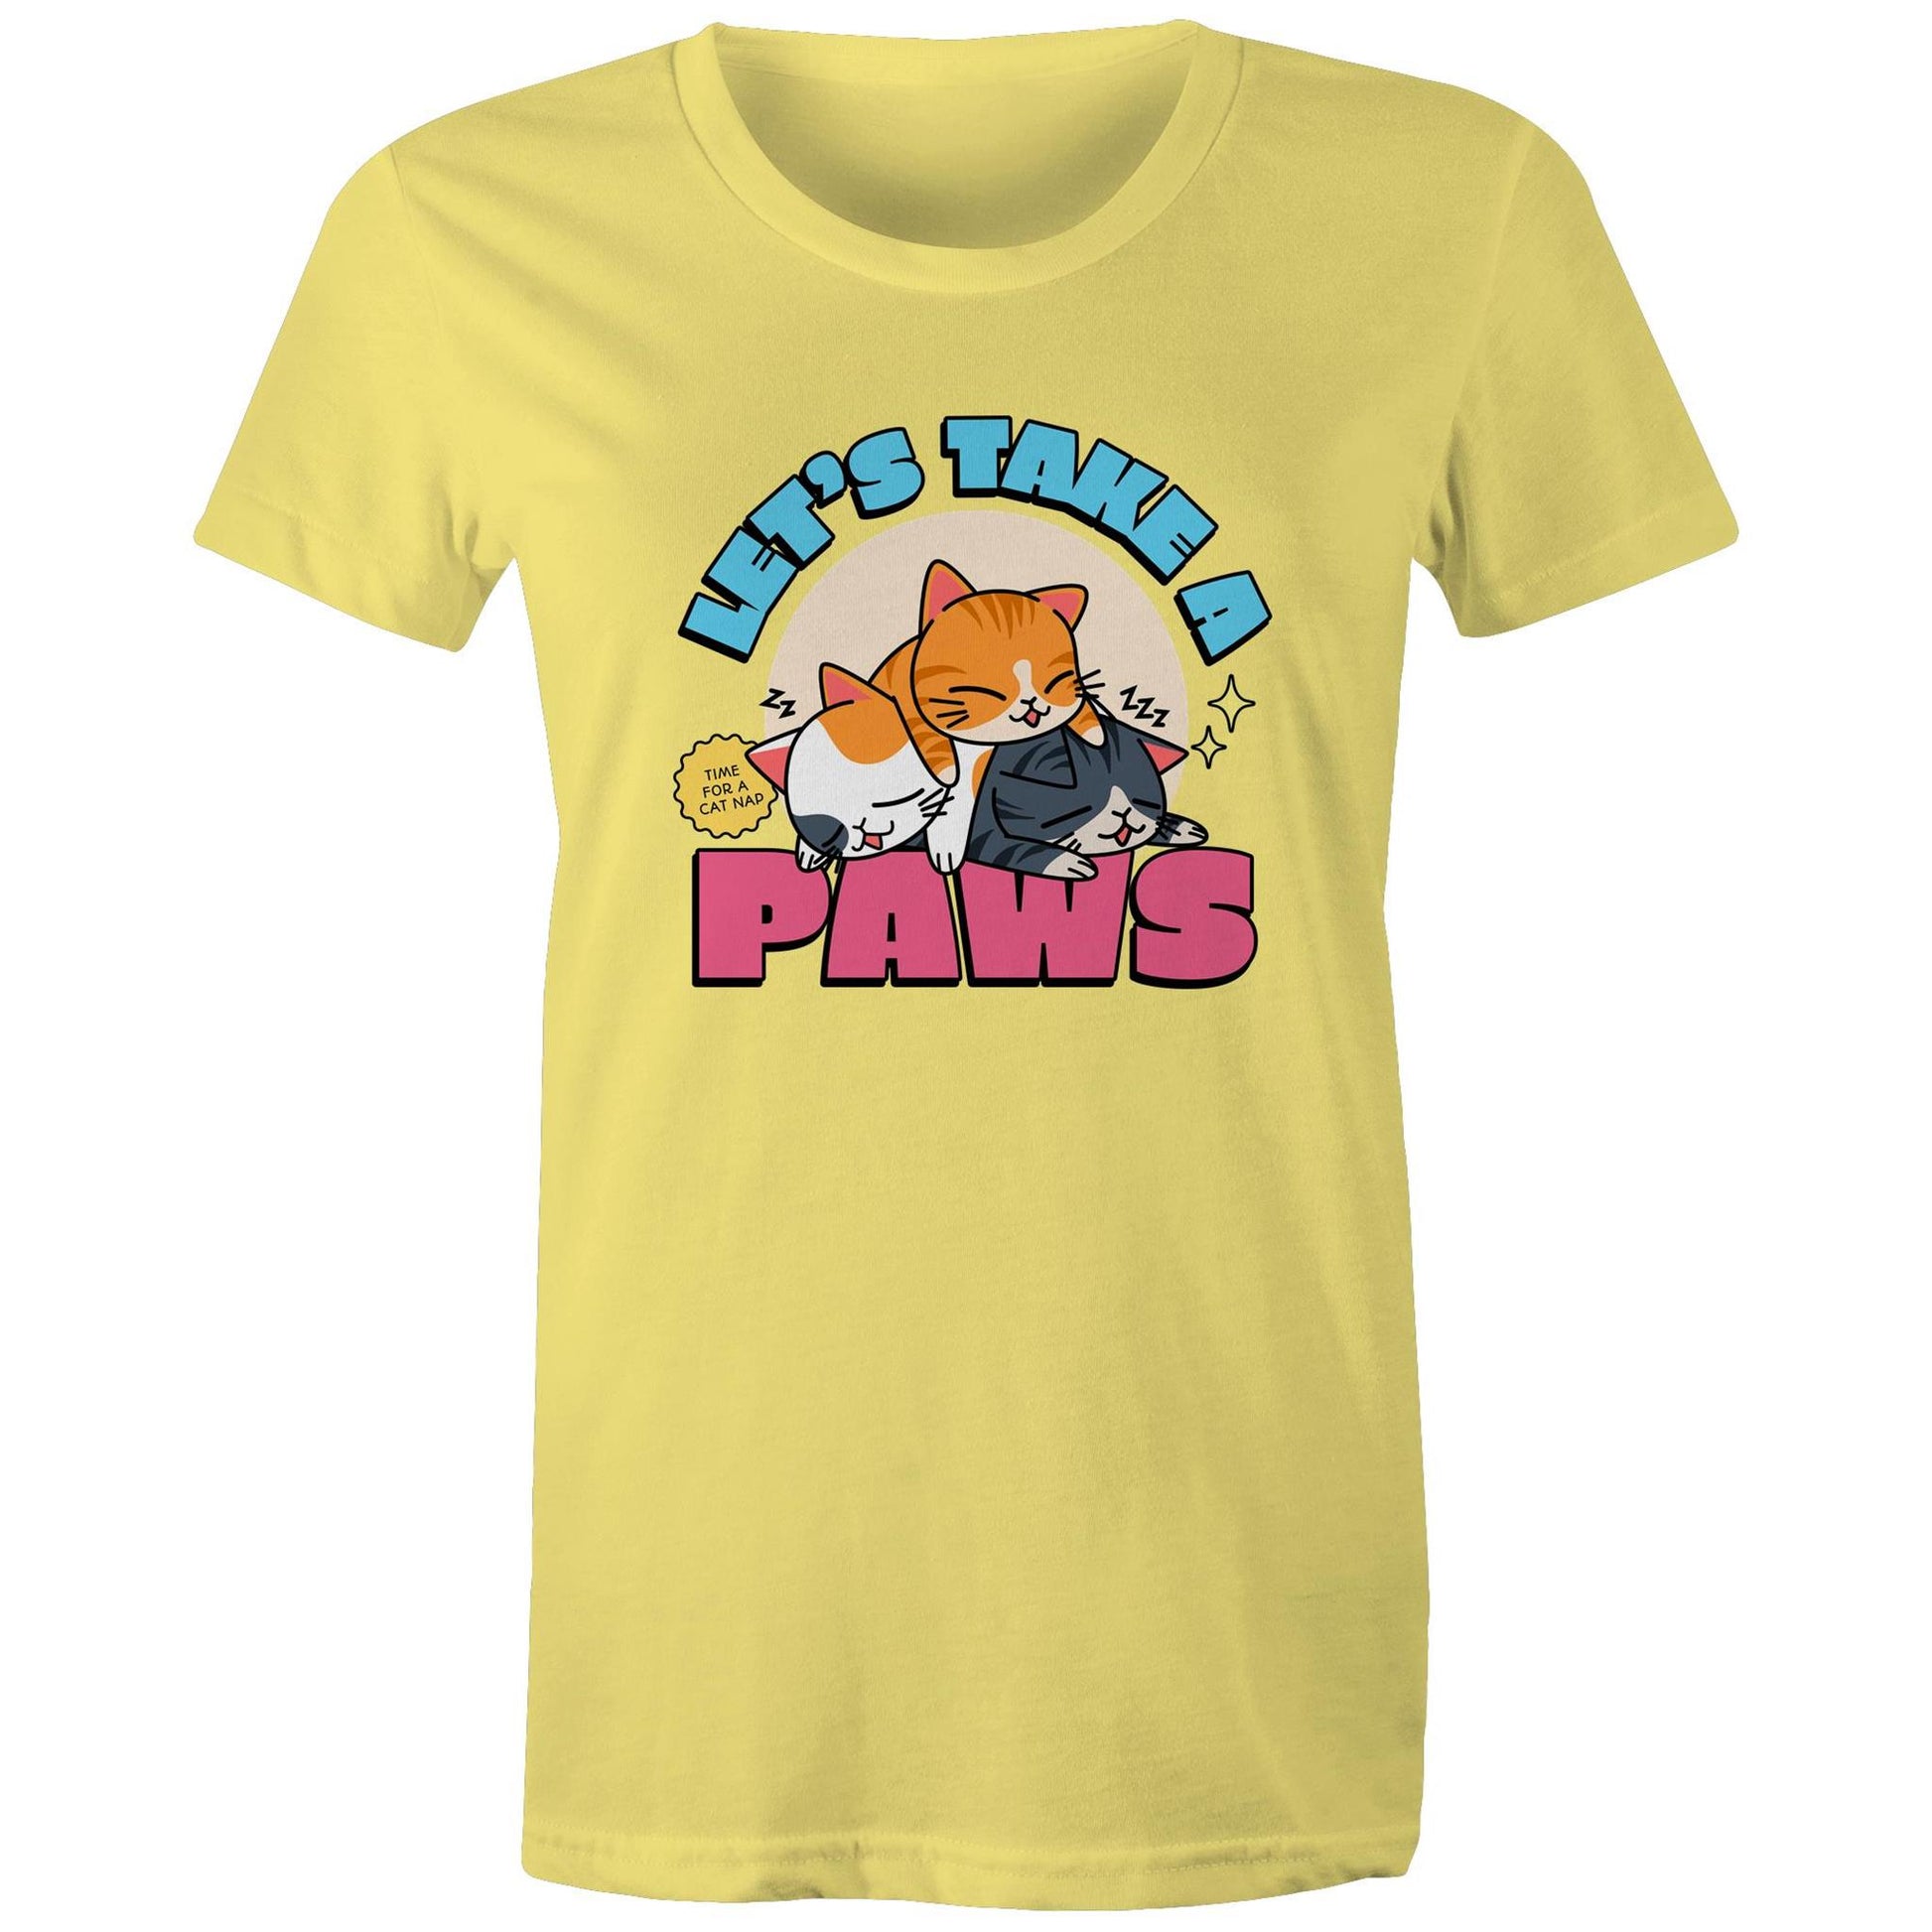 Let's Take A Paws, Time For A Cat Nap - Womens T-shirt Yellow Womens T-shirt animal